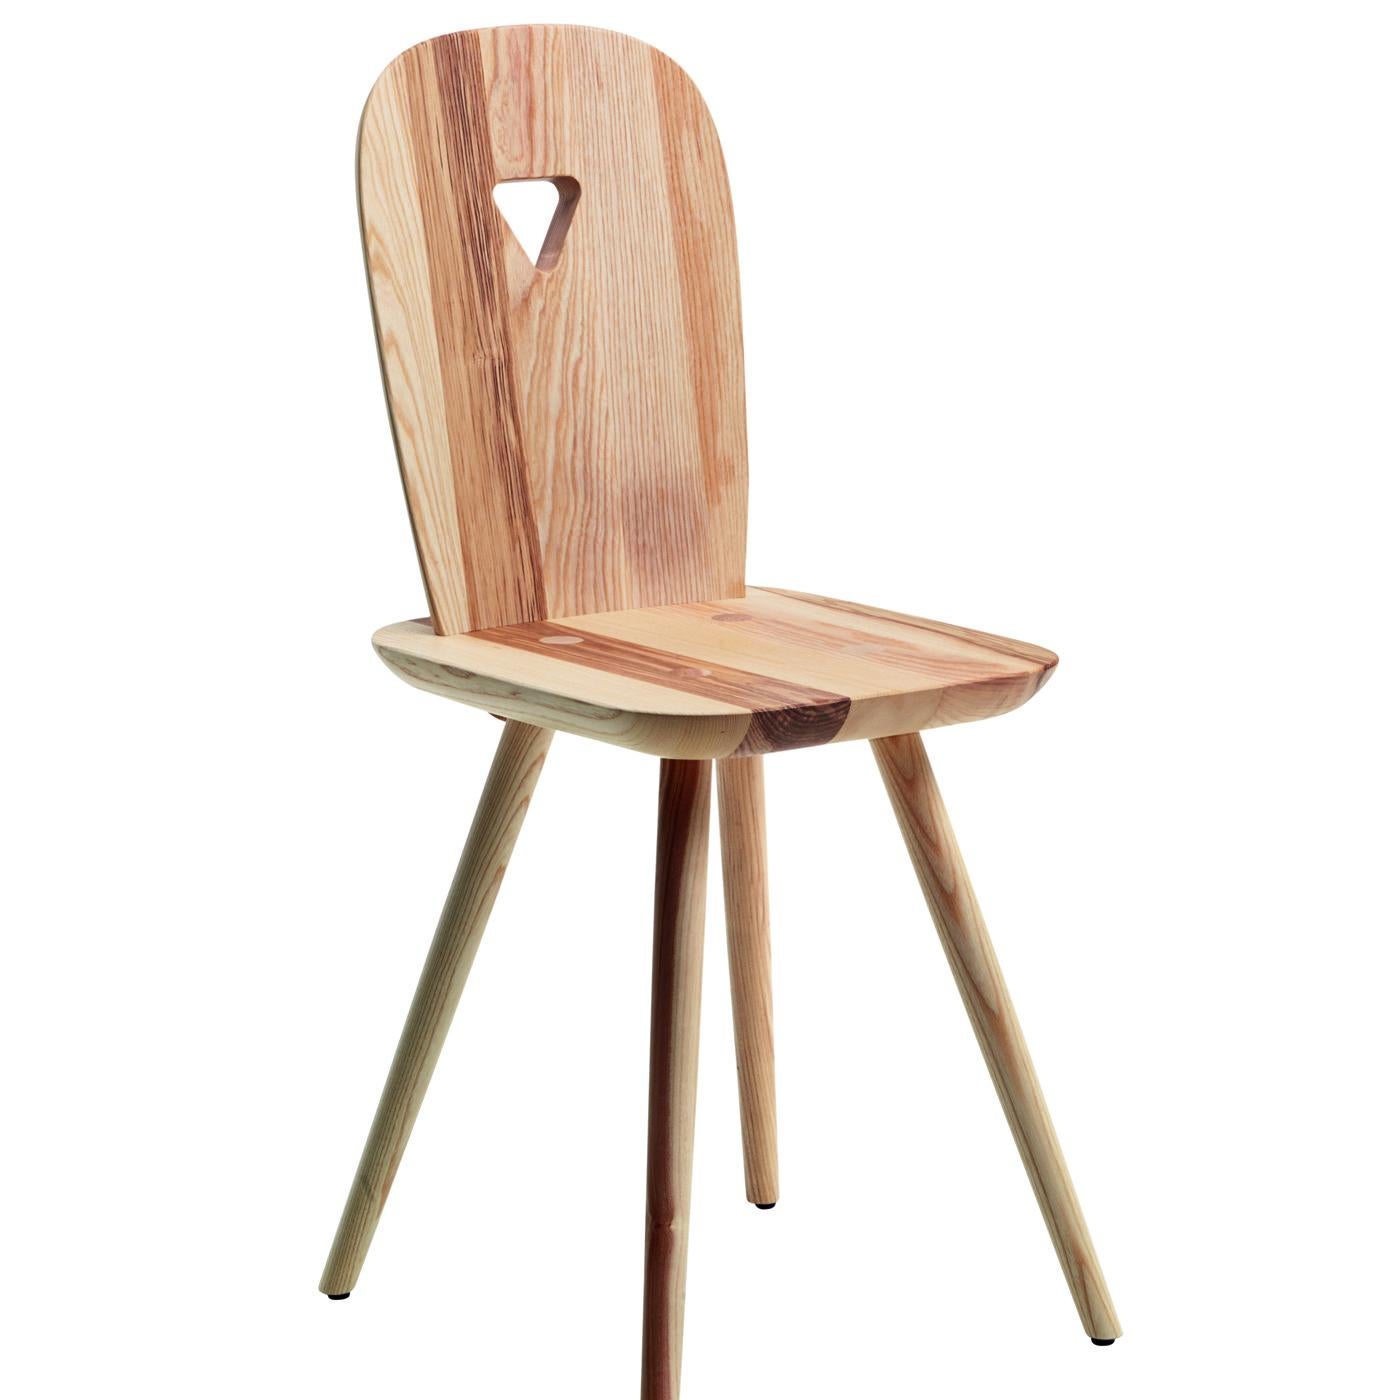 Designed by Luca Nichetto, the La-Dina chair uses an ingenious assembly system that gives stability to the chair while removing unnecessary elements that distract from the elegant design. This set includes two chairs of natural ashwood with four